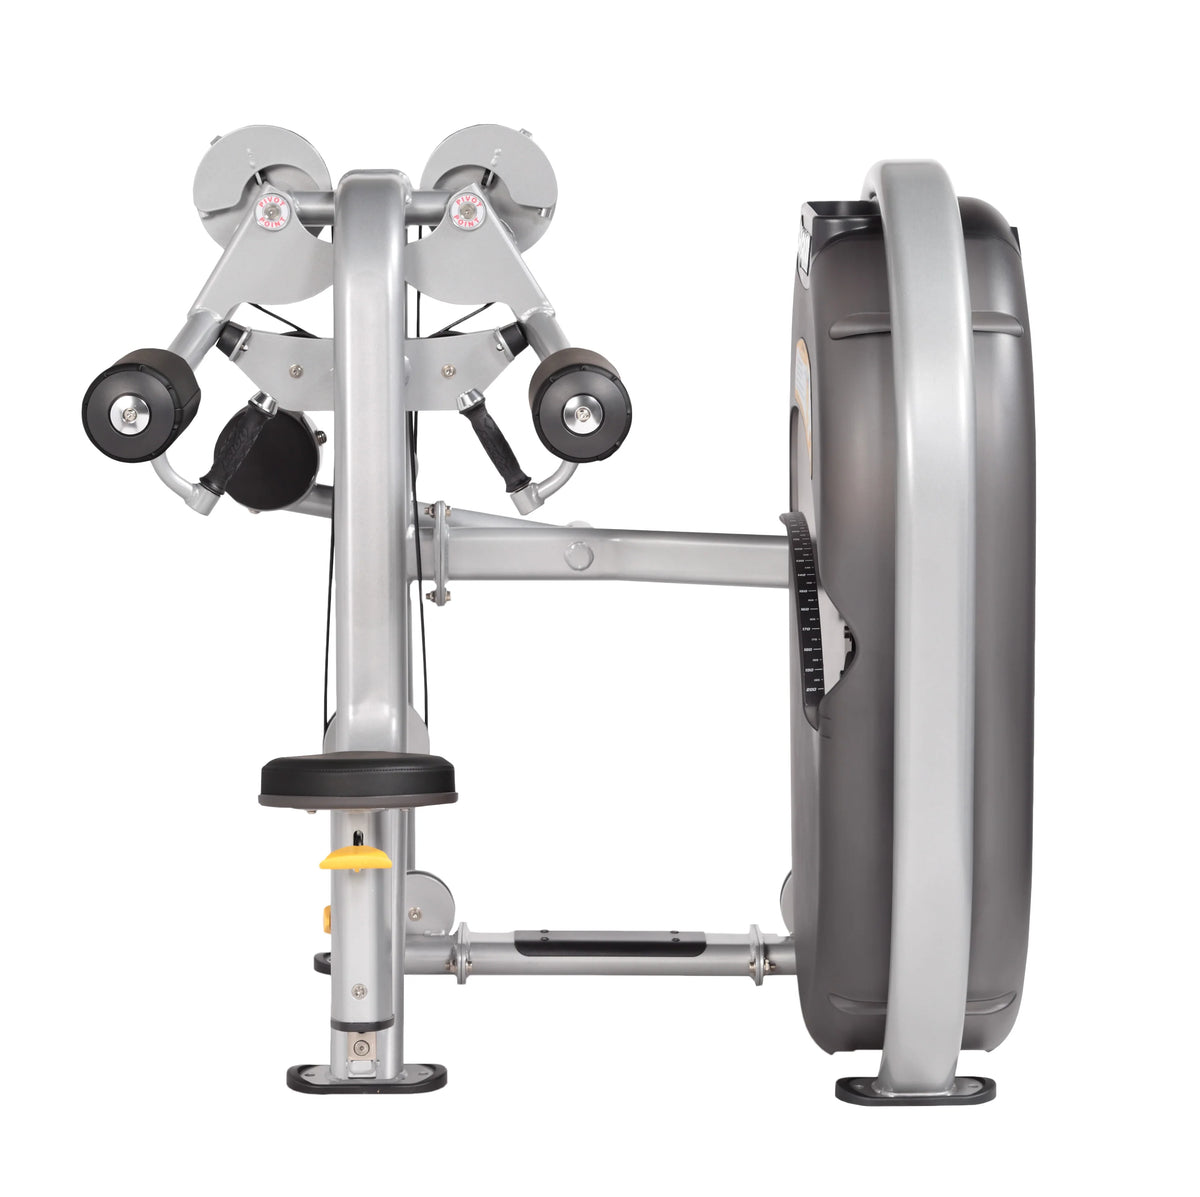 Hoist Fitness CL-3502 Lateral Raise rear view | Fitness Experience